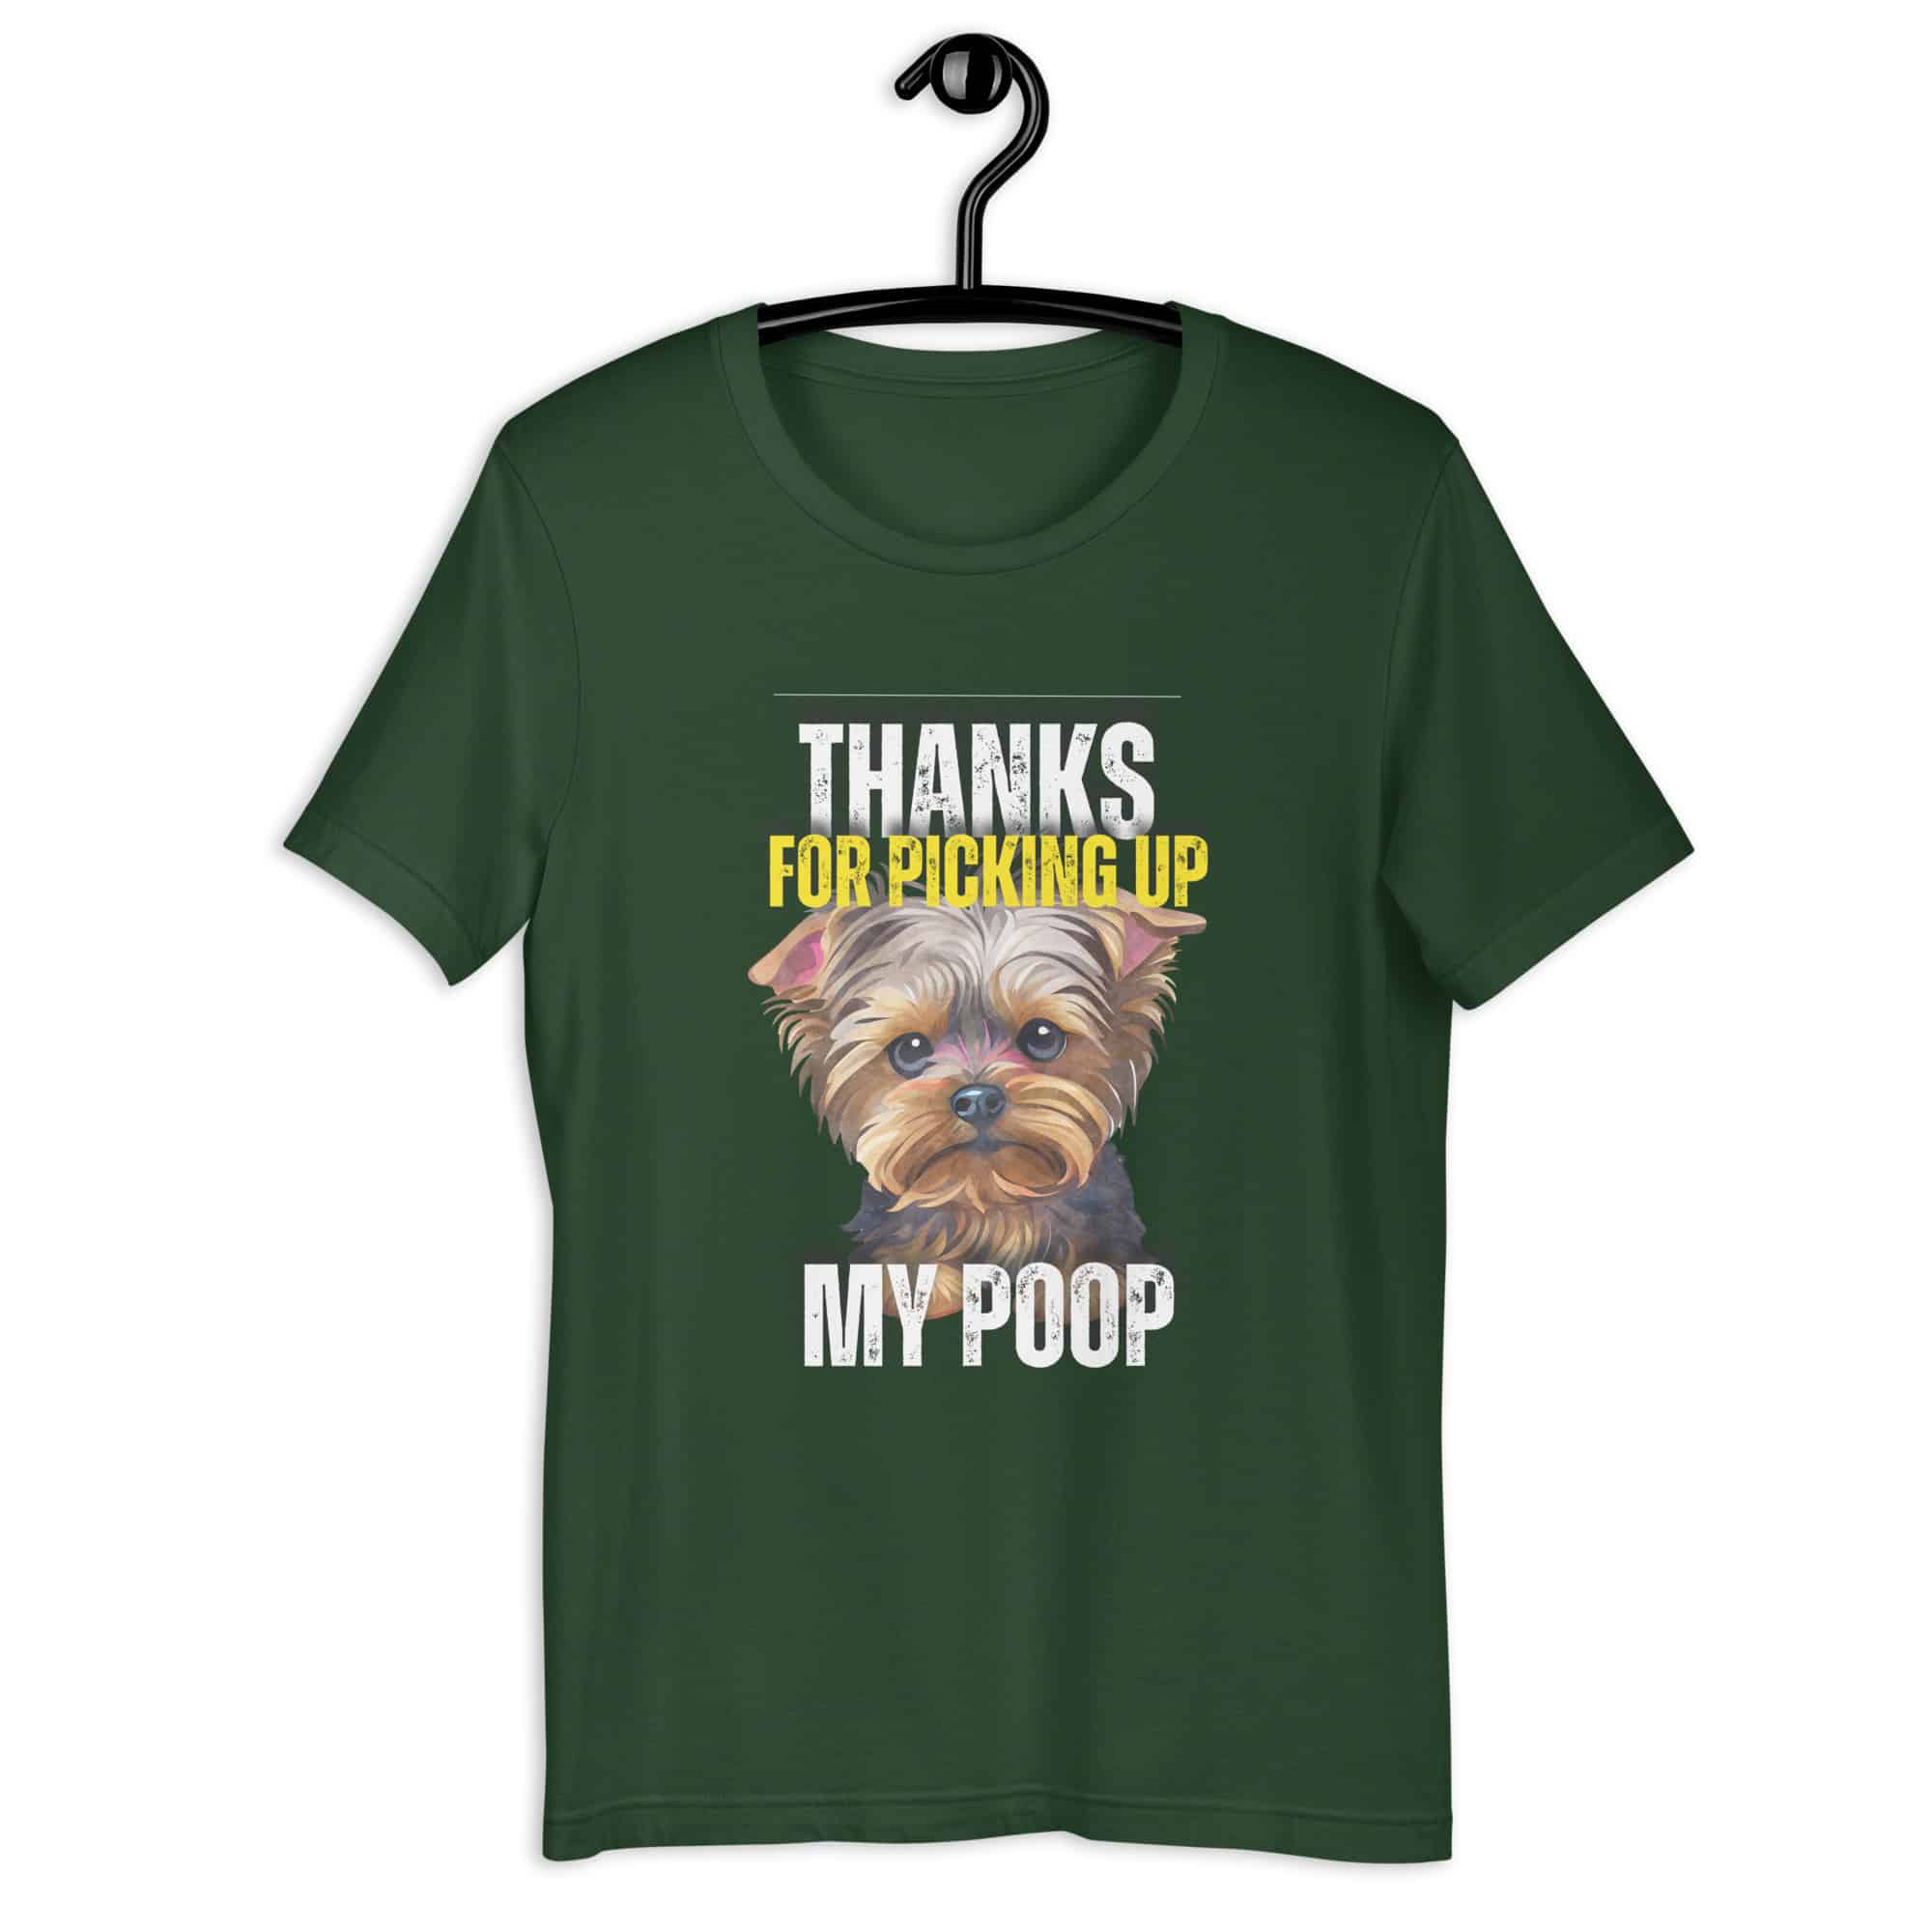 Thanks For Picking Up My POOP Funny Poodles Unisex T-Shirt.Forest